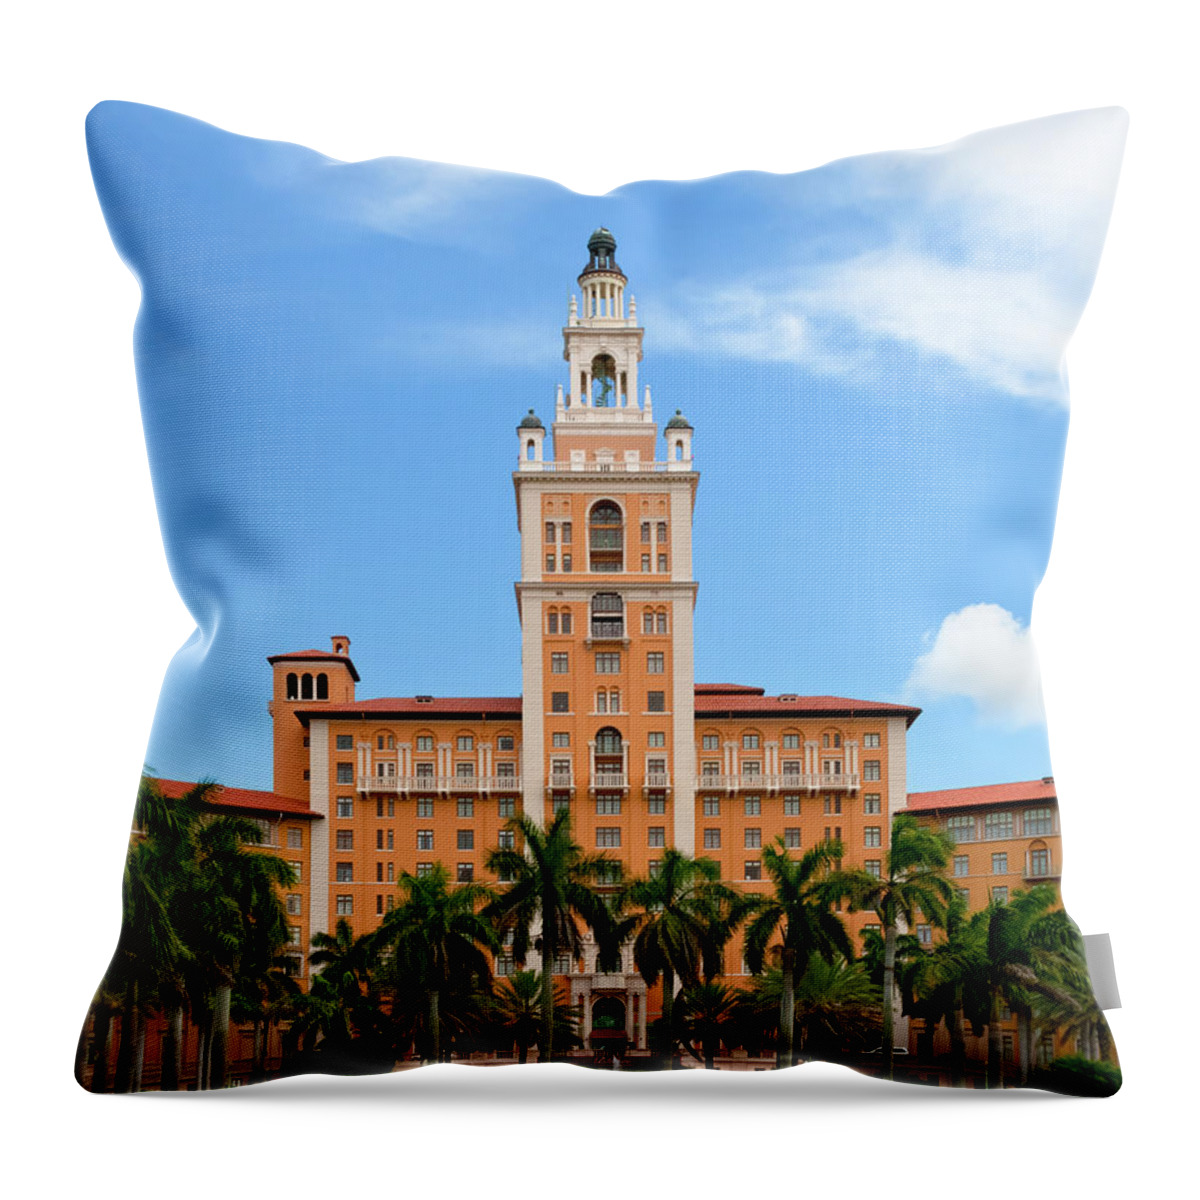 Architecture Throw Pillow featuring the photograph Biltmore Hotel Coral Gables by Ed Gleichman